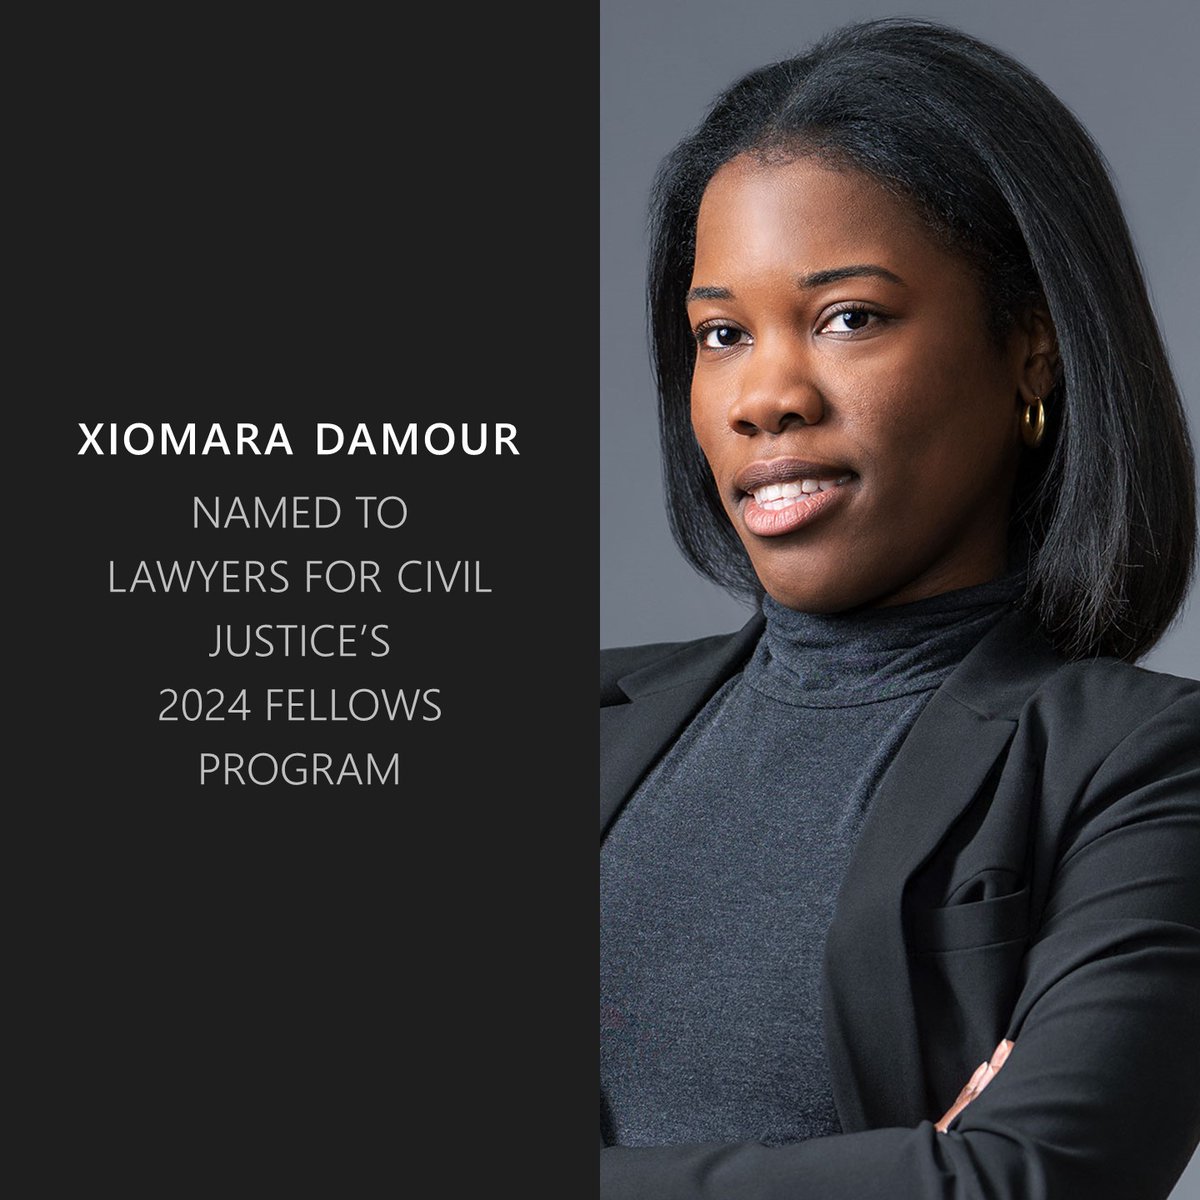 New York-based associate Xiomara Damour has been selected as a member of the 2024 @LCJReform Fellows Program! During a 3-year term she will have the opportunity to engage in meaningful policy work and collaborate with some of the leading defense and corporate counsel in the US.